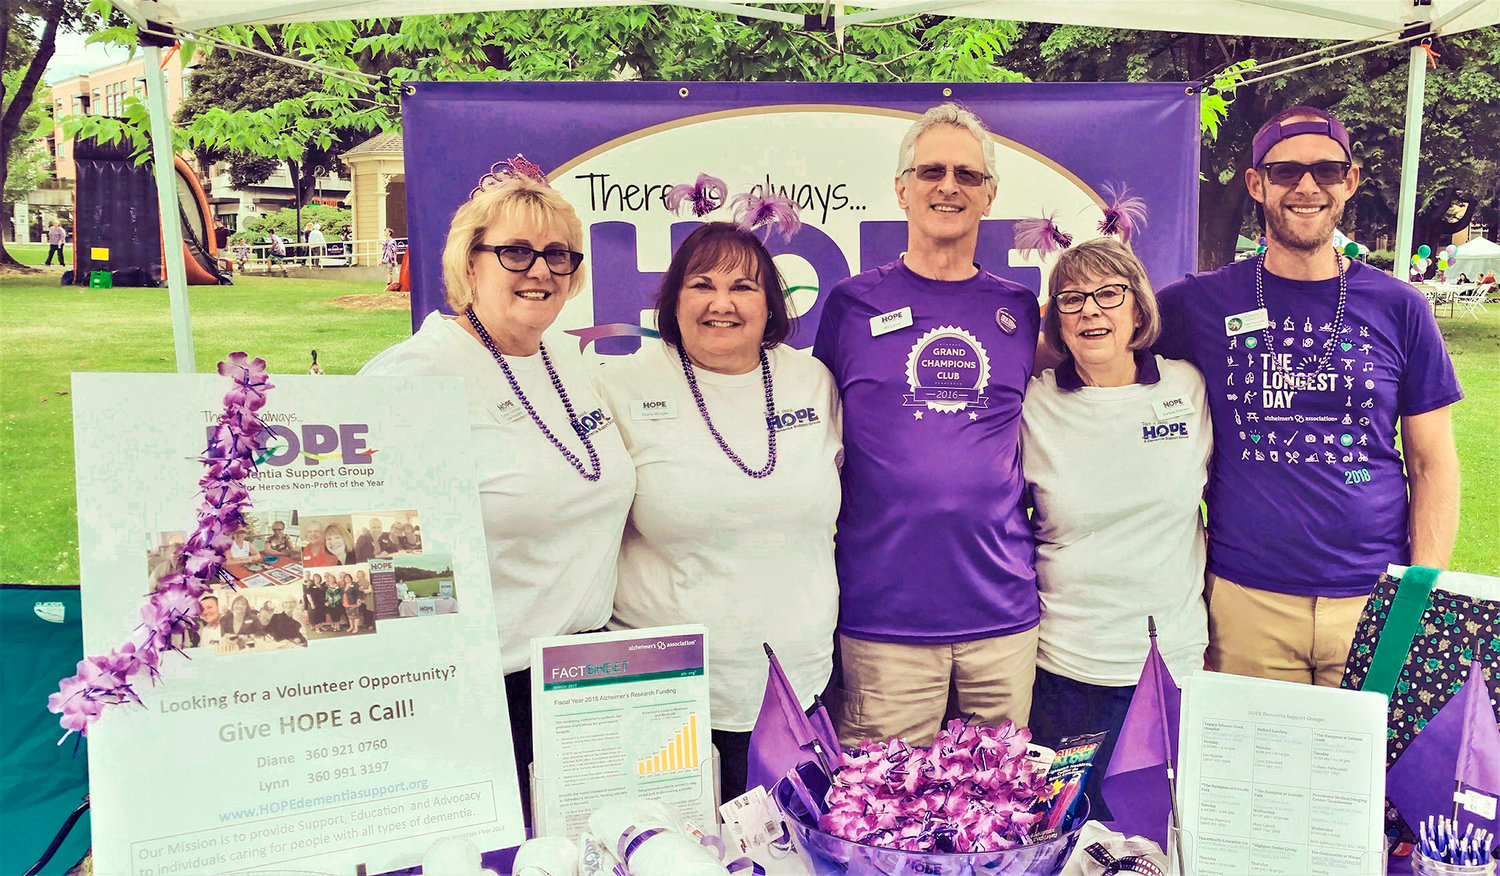 Staff from HOPE Dementia Support attend a previous Longest Day event.